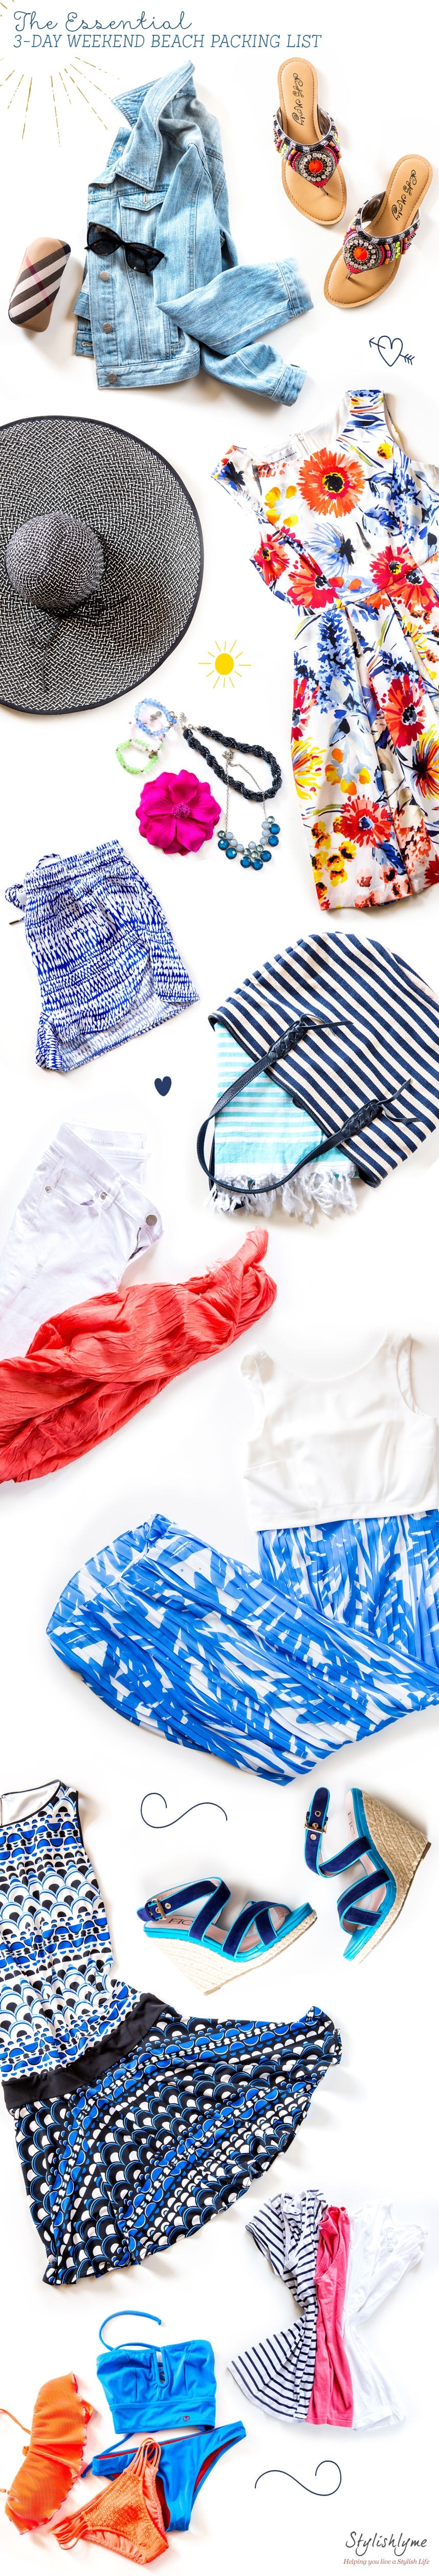 The Essential 3-Day Weekend Beach Packing List